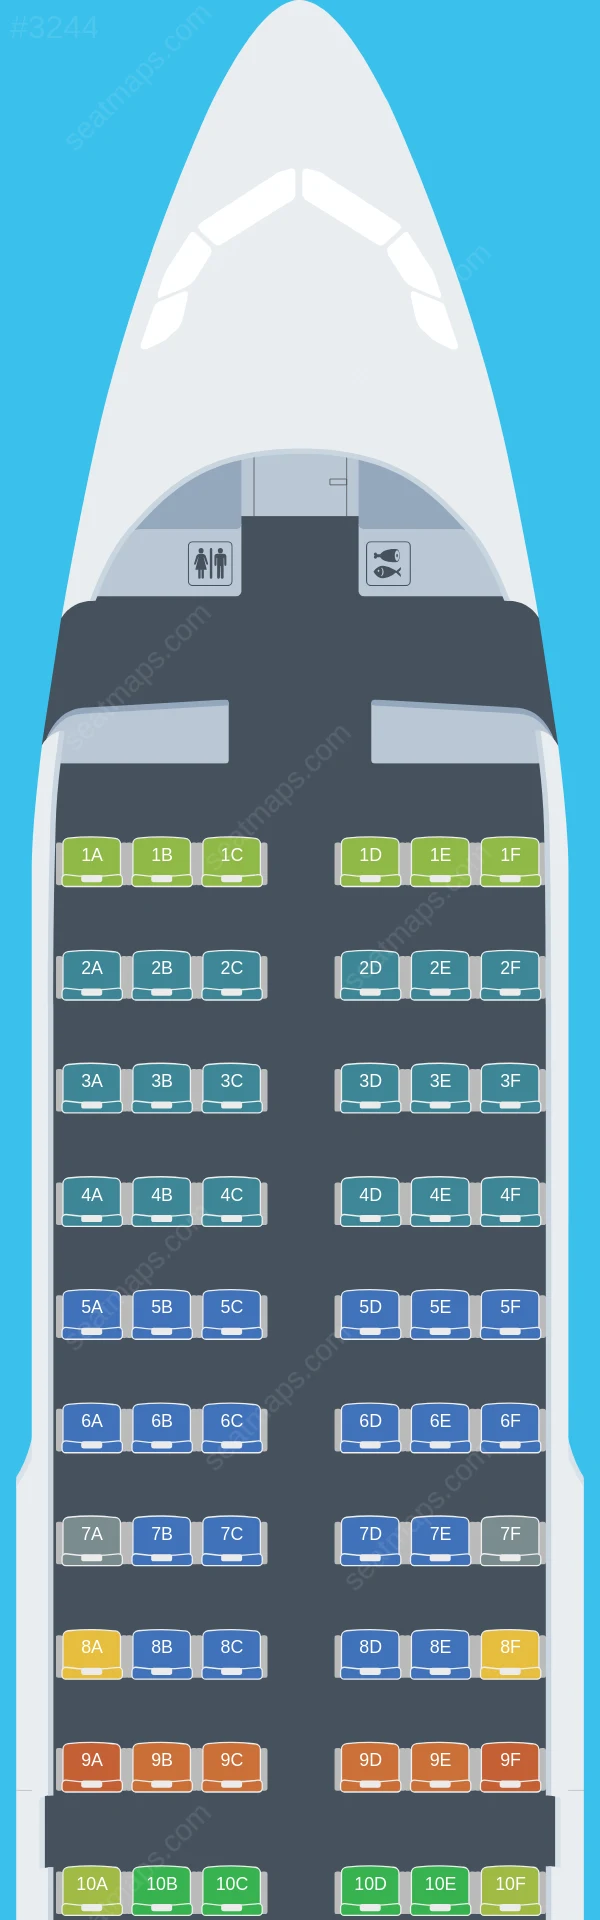 Vueling Airbus A319-100 seatmap preview